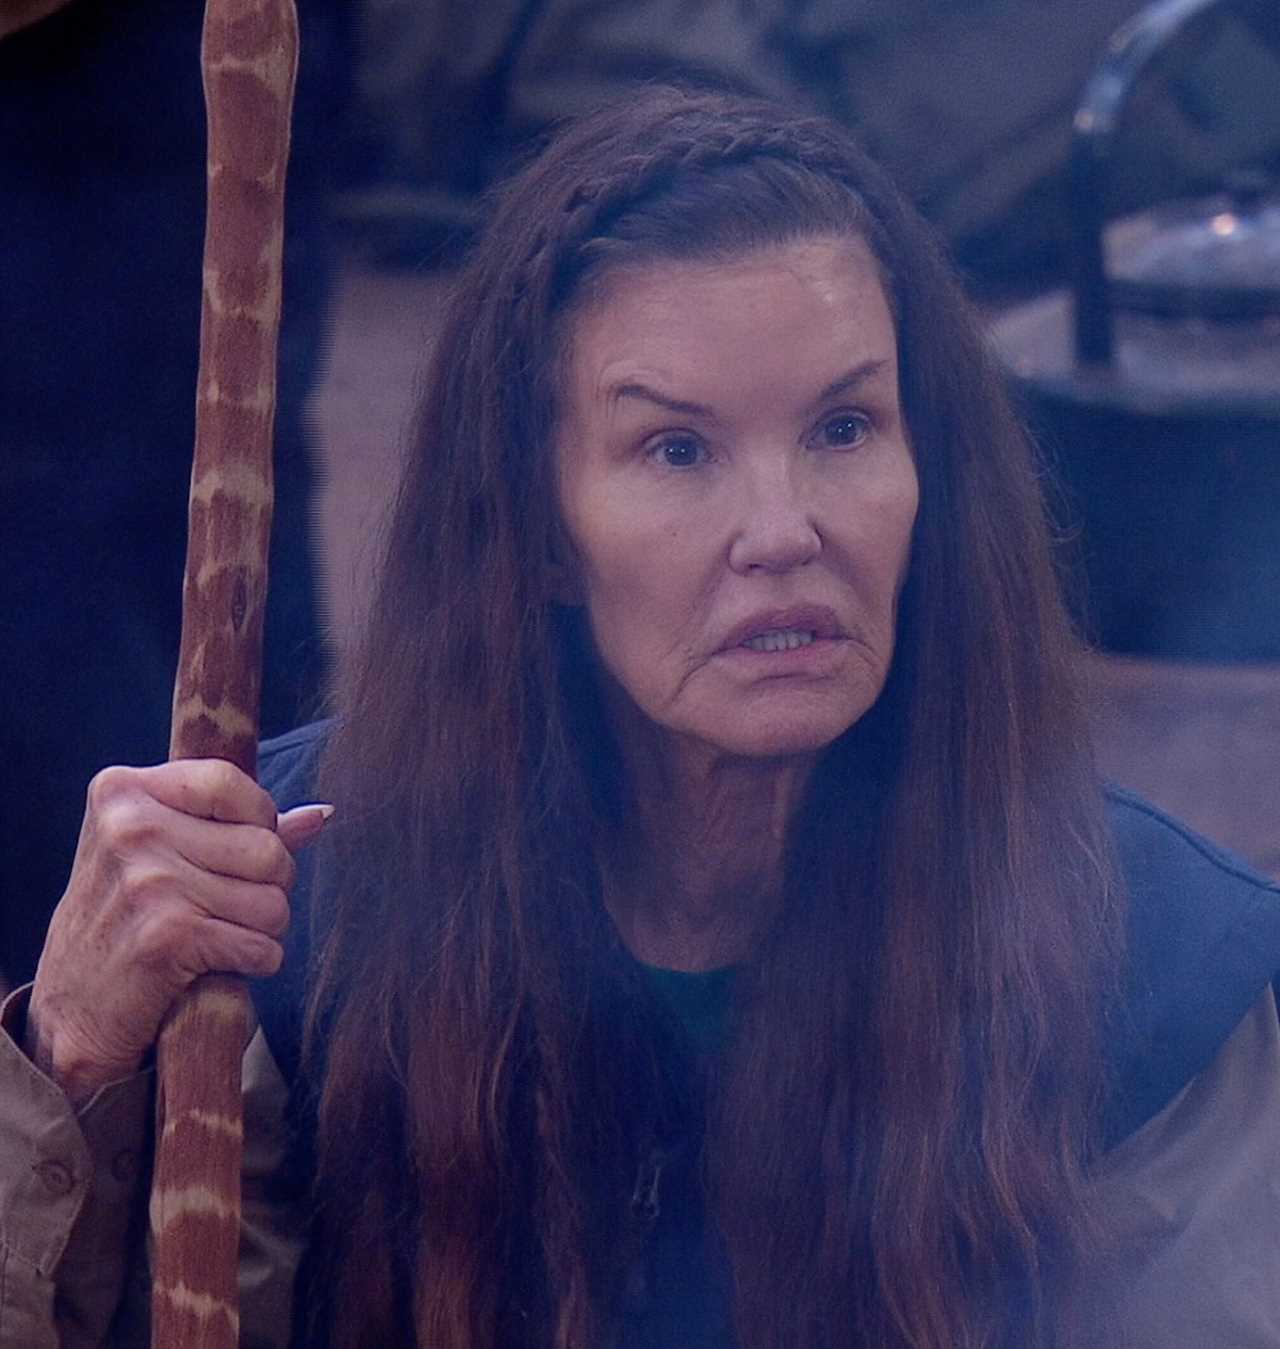 I’m A Celebrity viewers baffled by Janice Dickinson’s face as she makes surprise return for final trial